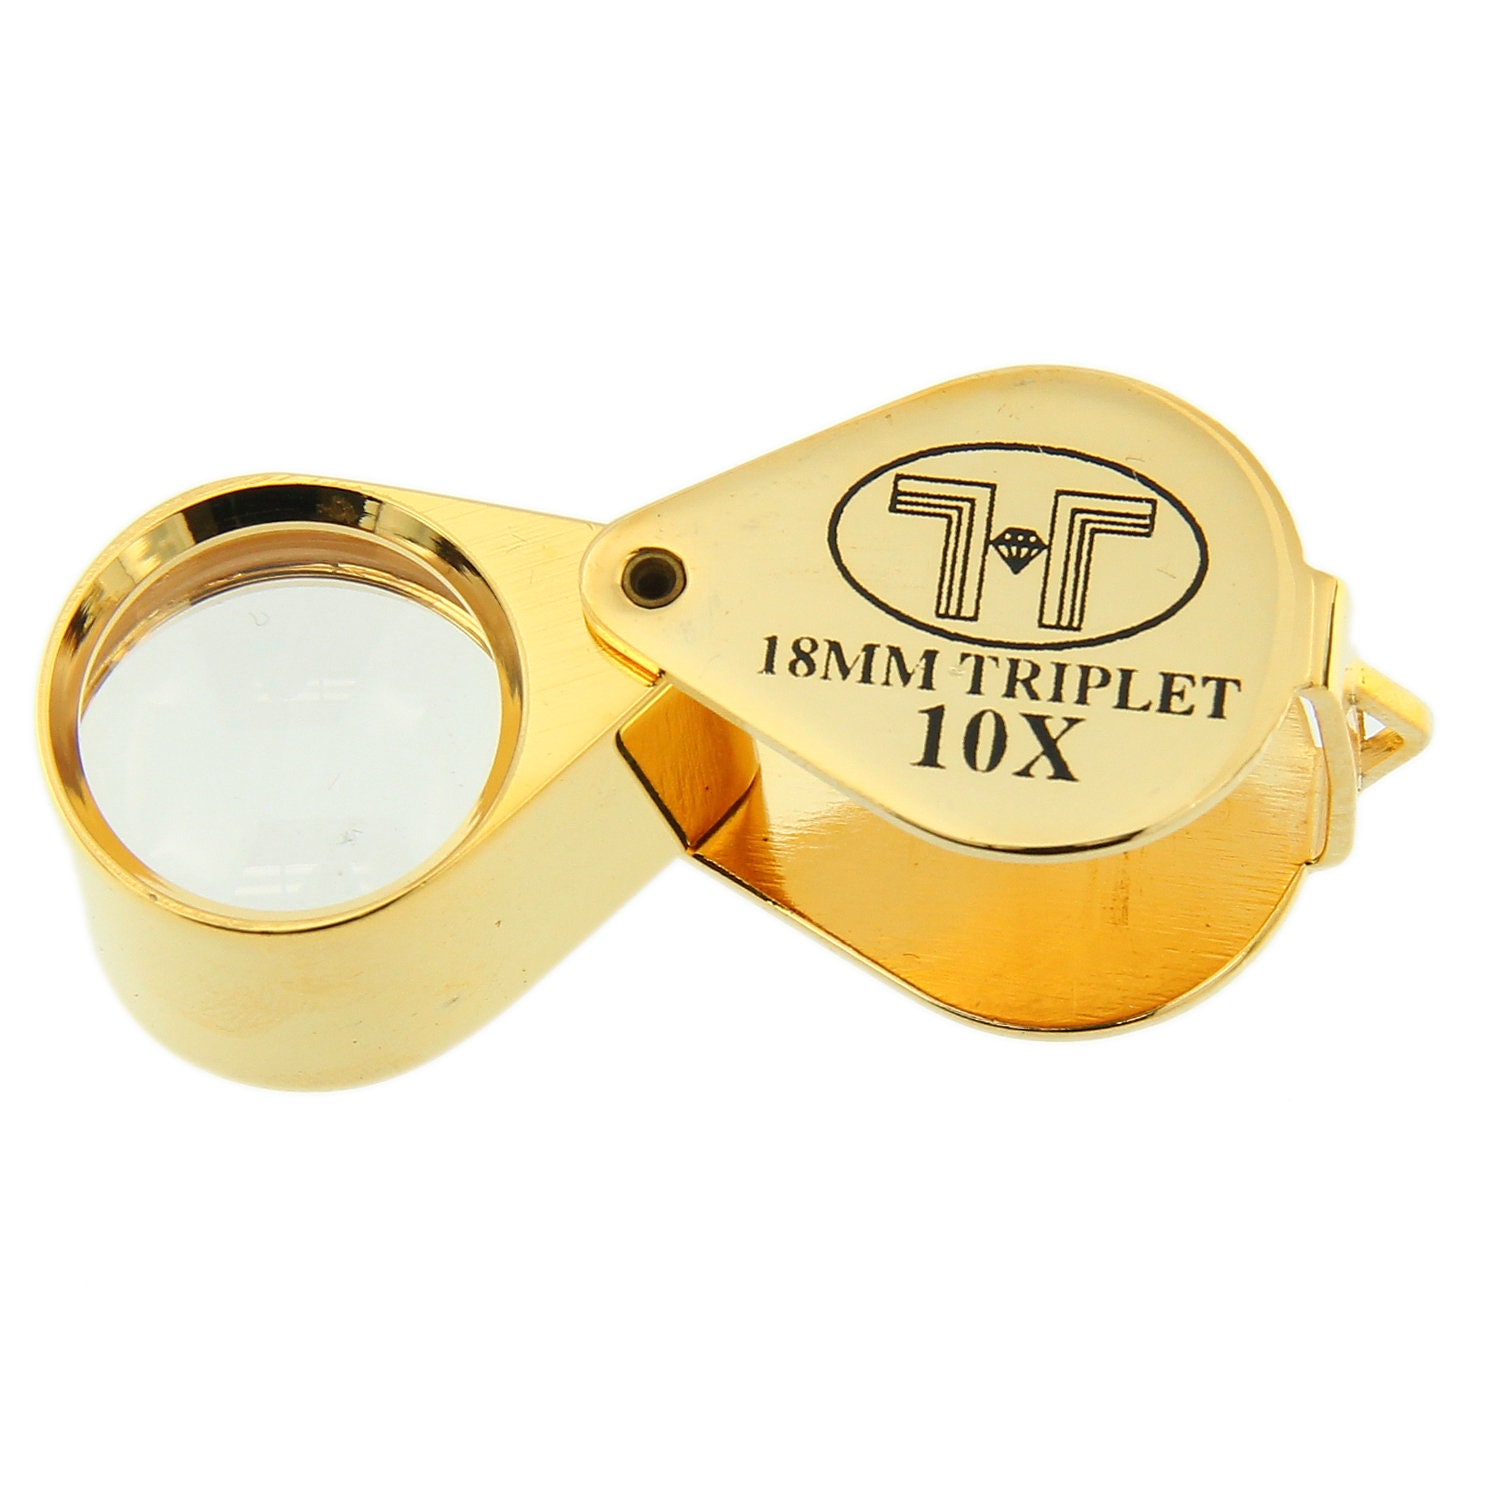 10x-18mm Silver Triplet Jewelers Loupe With Leather Case 